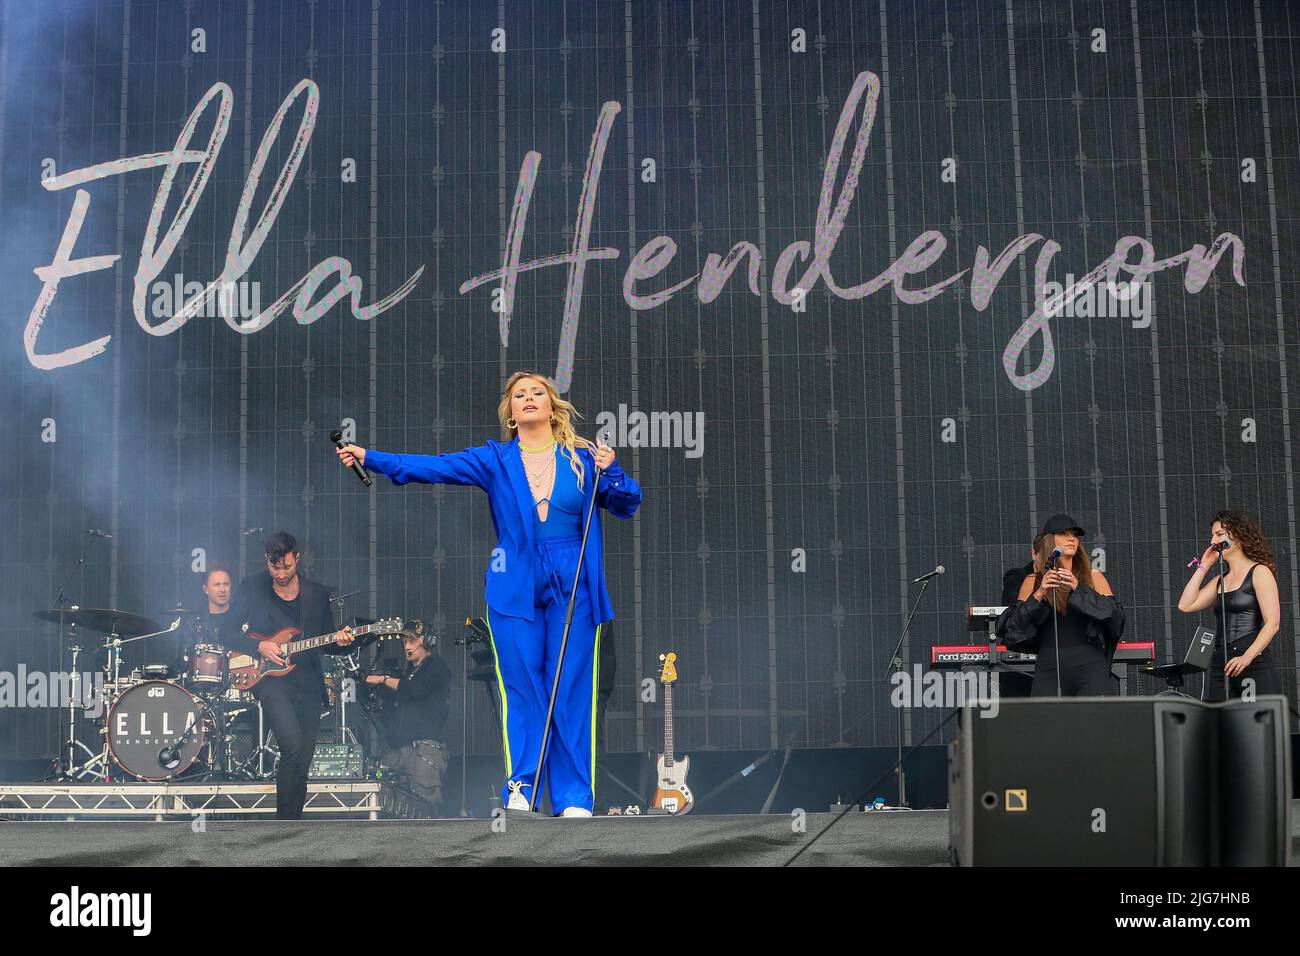 Glasgow, UK. 08th July, 2022. ELLA HENDERSON, famous singer with family connections to Scotland played at TRNSMT music festival, Glasgow Green, Glasgow, Scotland, UK. The festival is on for three days and is expected to be a sell out with thousands of music fans attending. Credit: Findlay/Alamy Live News Stock Photo